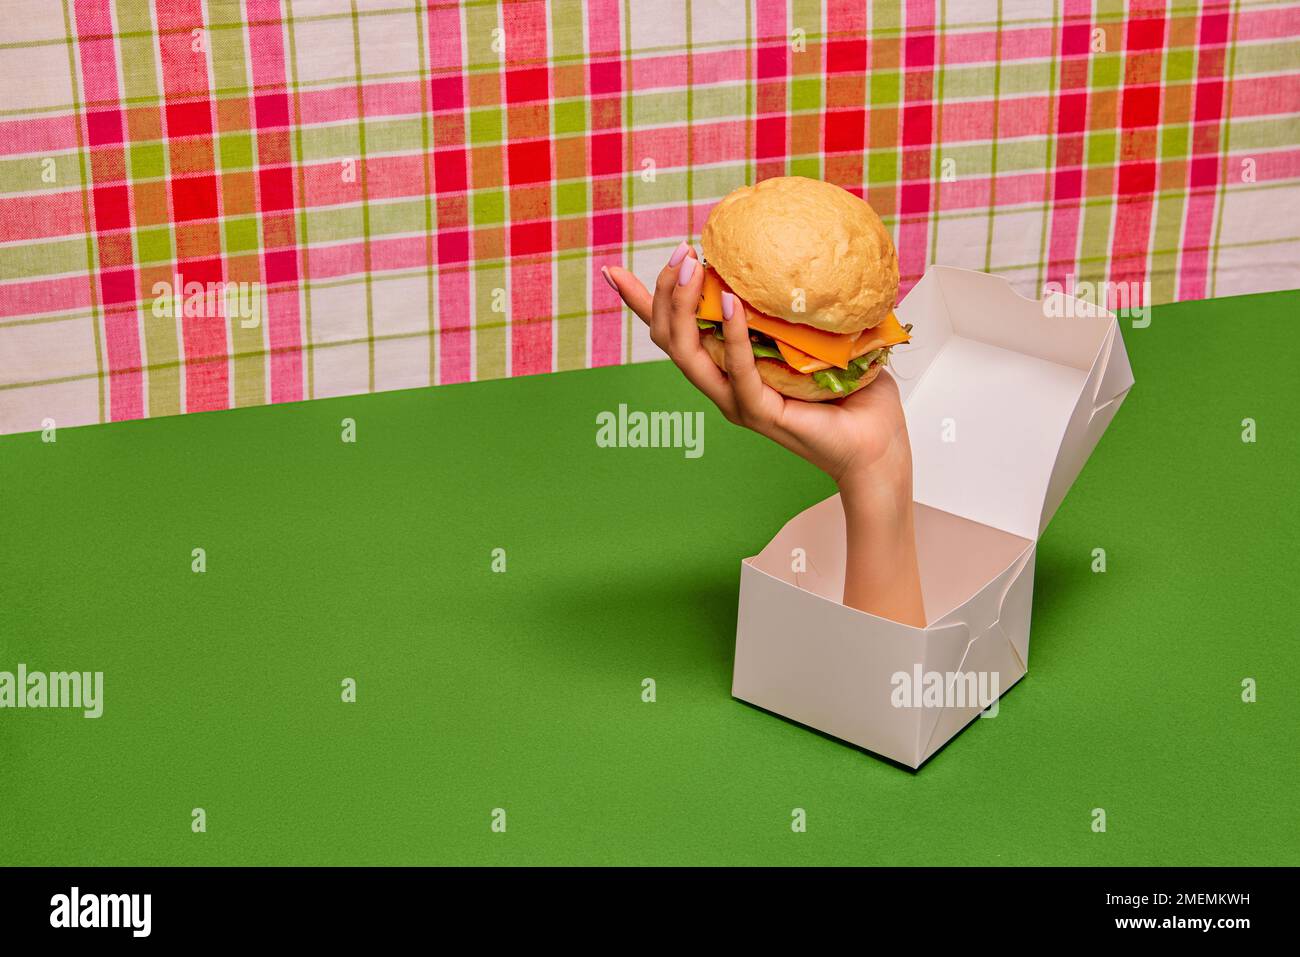 Food pop art photography. Female hand sticking out box and holding burger on green tablecloth. Delicious american food Stock Photo